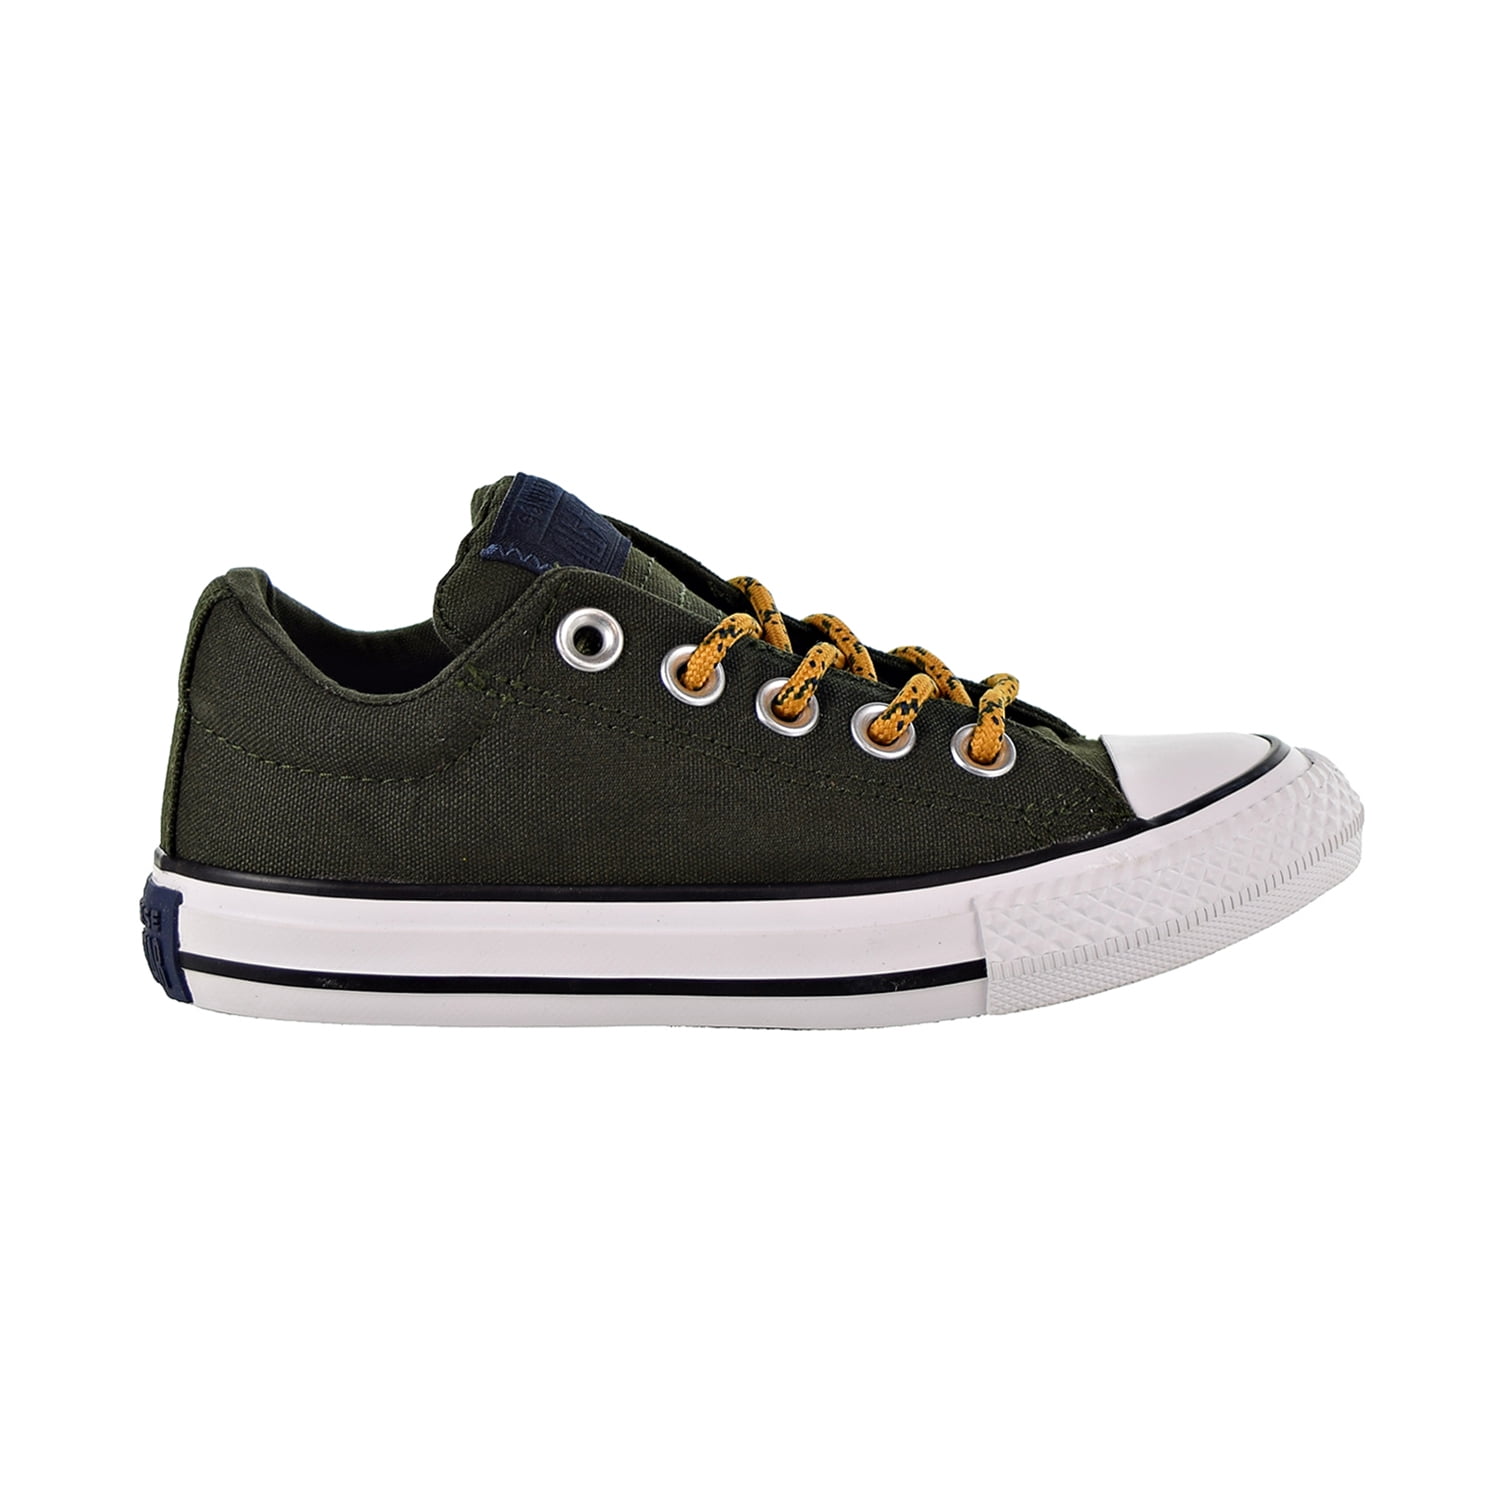 green and gold converse